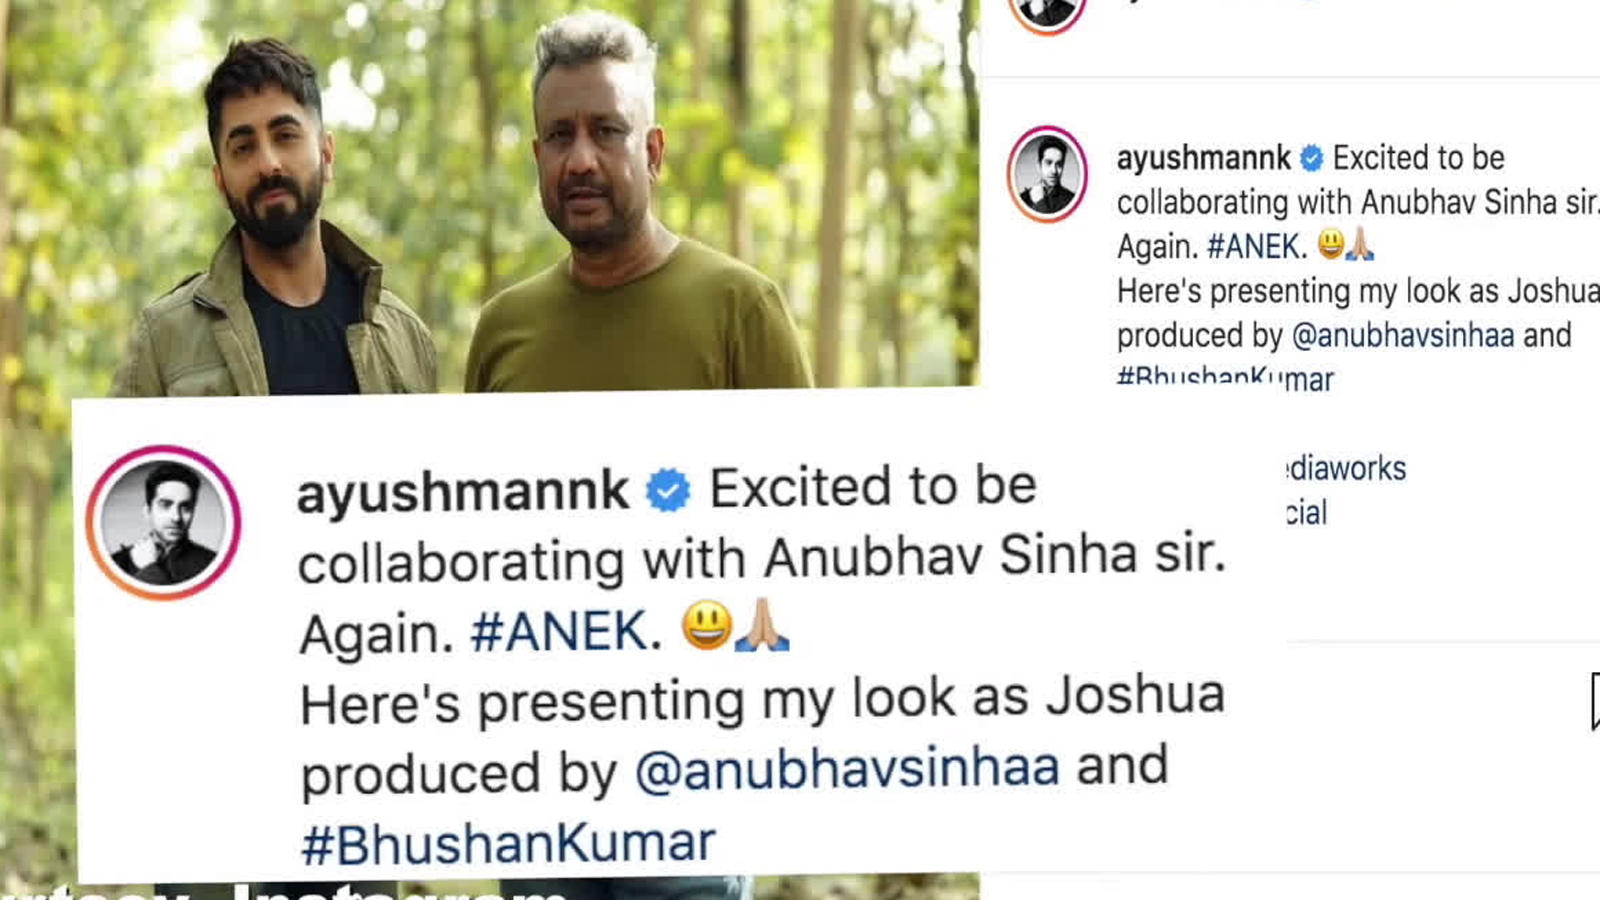 Ayushmann Khurrana Anubhav Sinha Collaborate Again For Anek Hindi Movie News Bollywood Times Of India Ayushmann started off his career as a popular radio jockey, and eventually became a vj on mtv india and one of the most popular hosts in india. ayushmann khurrana anubhav sinha collaborate again for anek